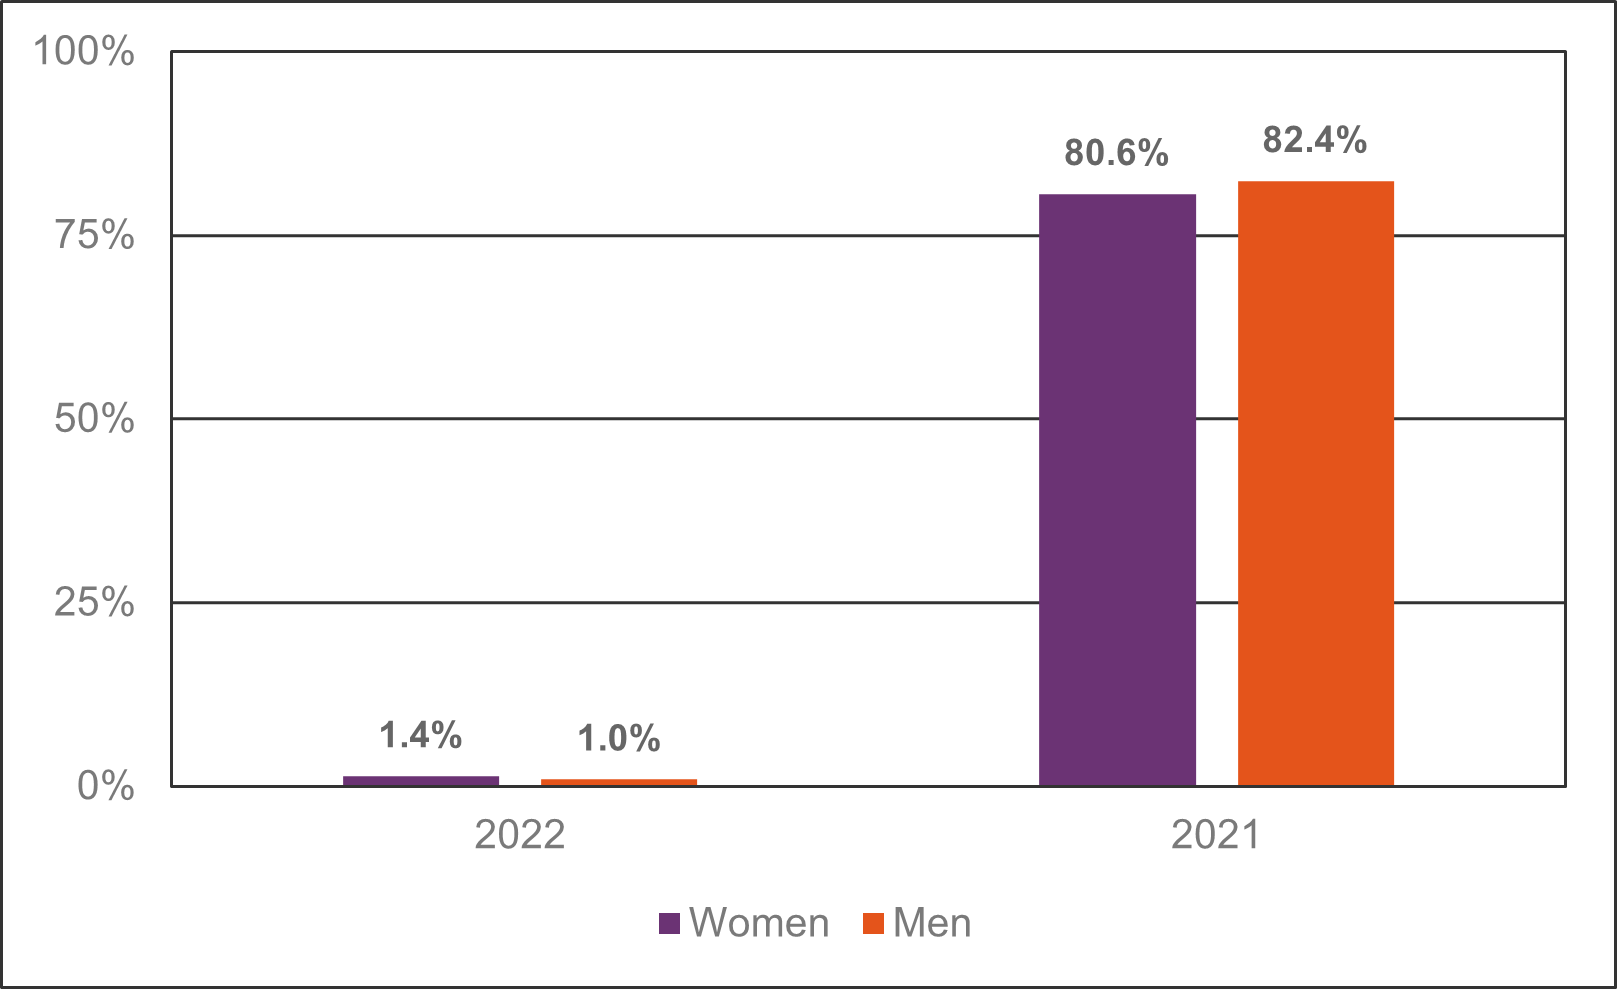 Graph showing 2022 proportion of women and men receiving a bonus with 2021 for comparison. 1.4% of women received a bonus, 1% of men